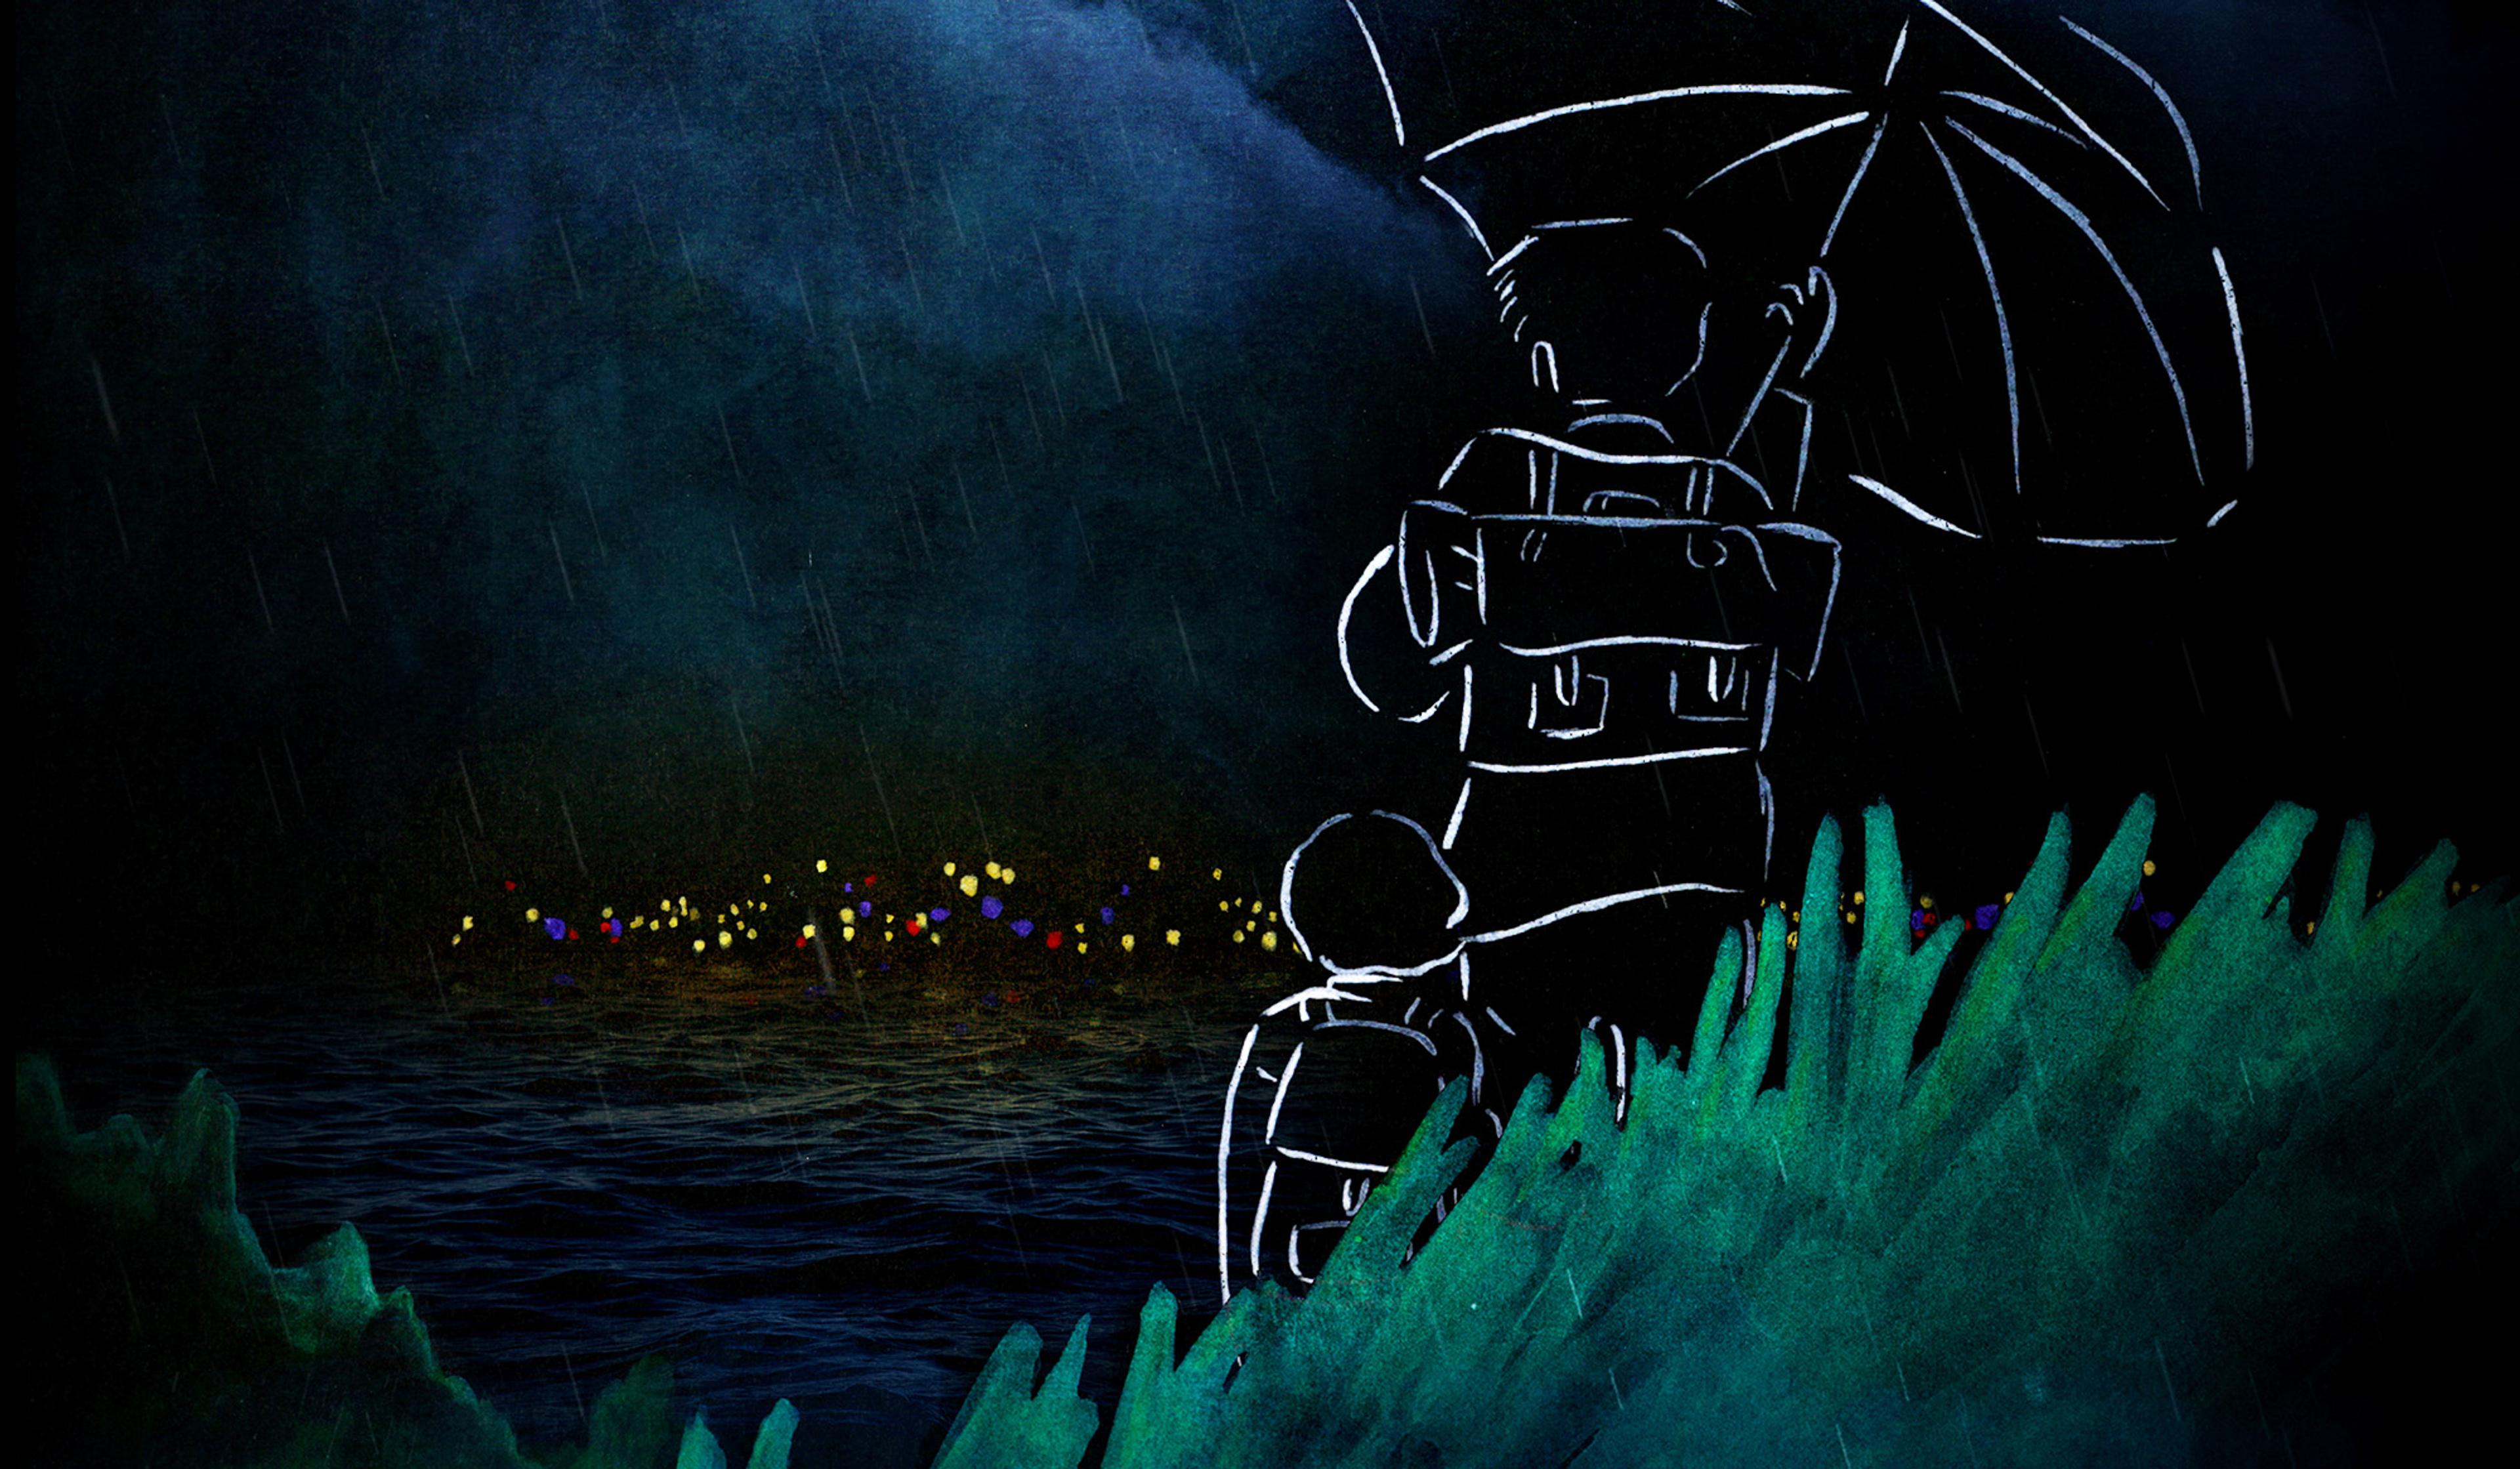 Silhouettes of two people with backpacks in the rain, holding an umbrella, looking at distant city lights across a dark body of water.